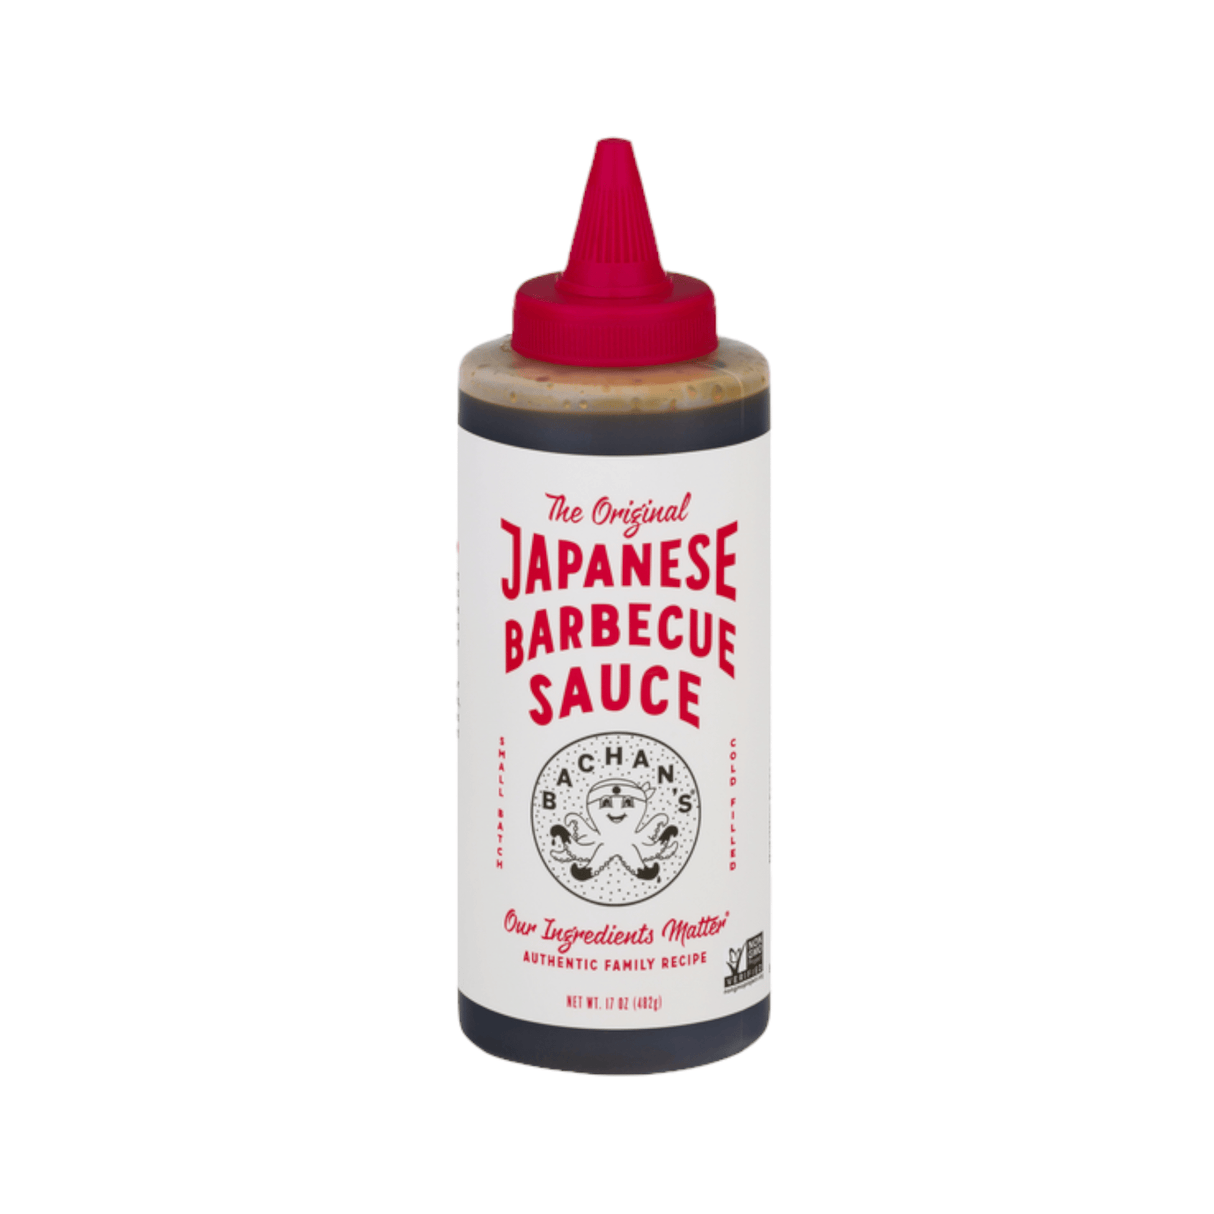 Bachan’s The Original Japanese Barbecue Sauce